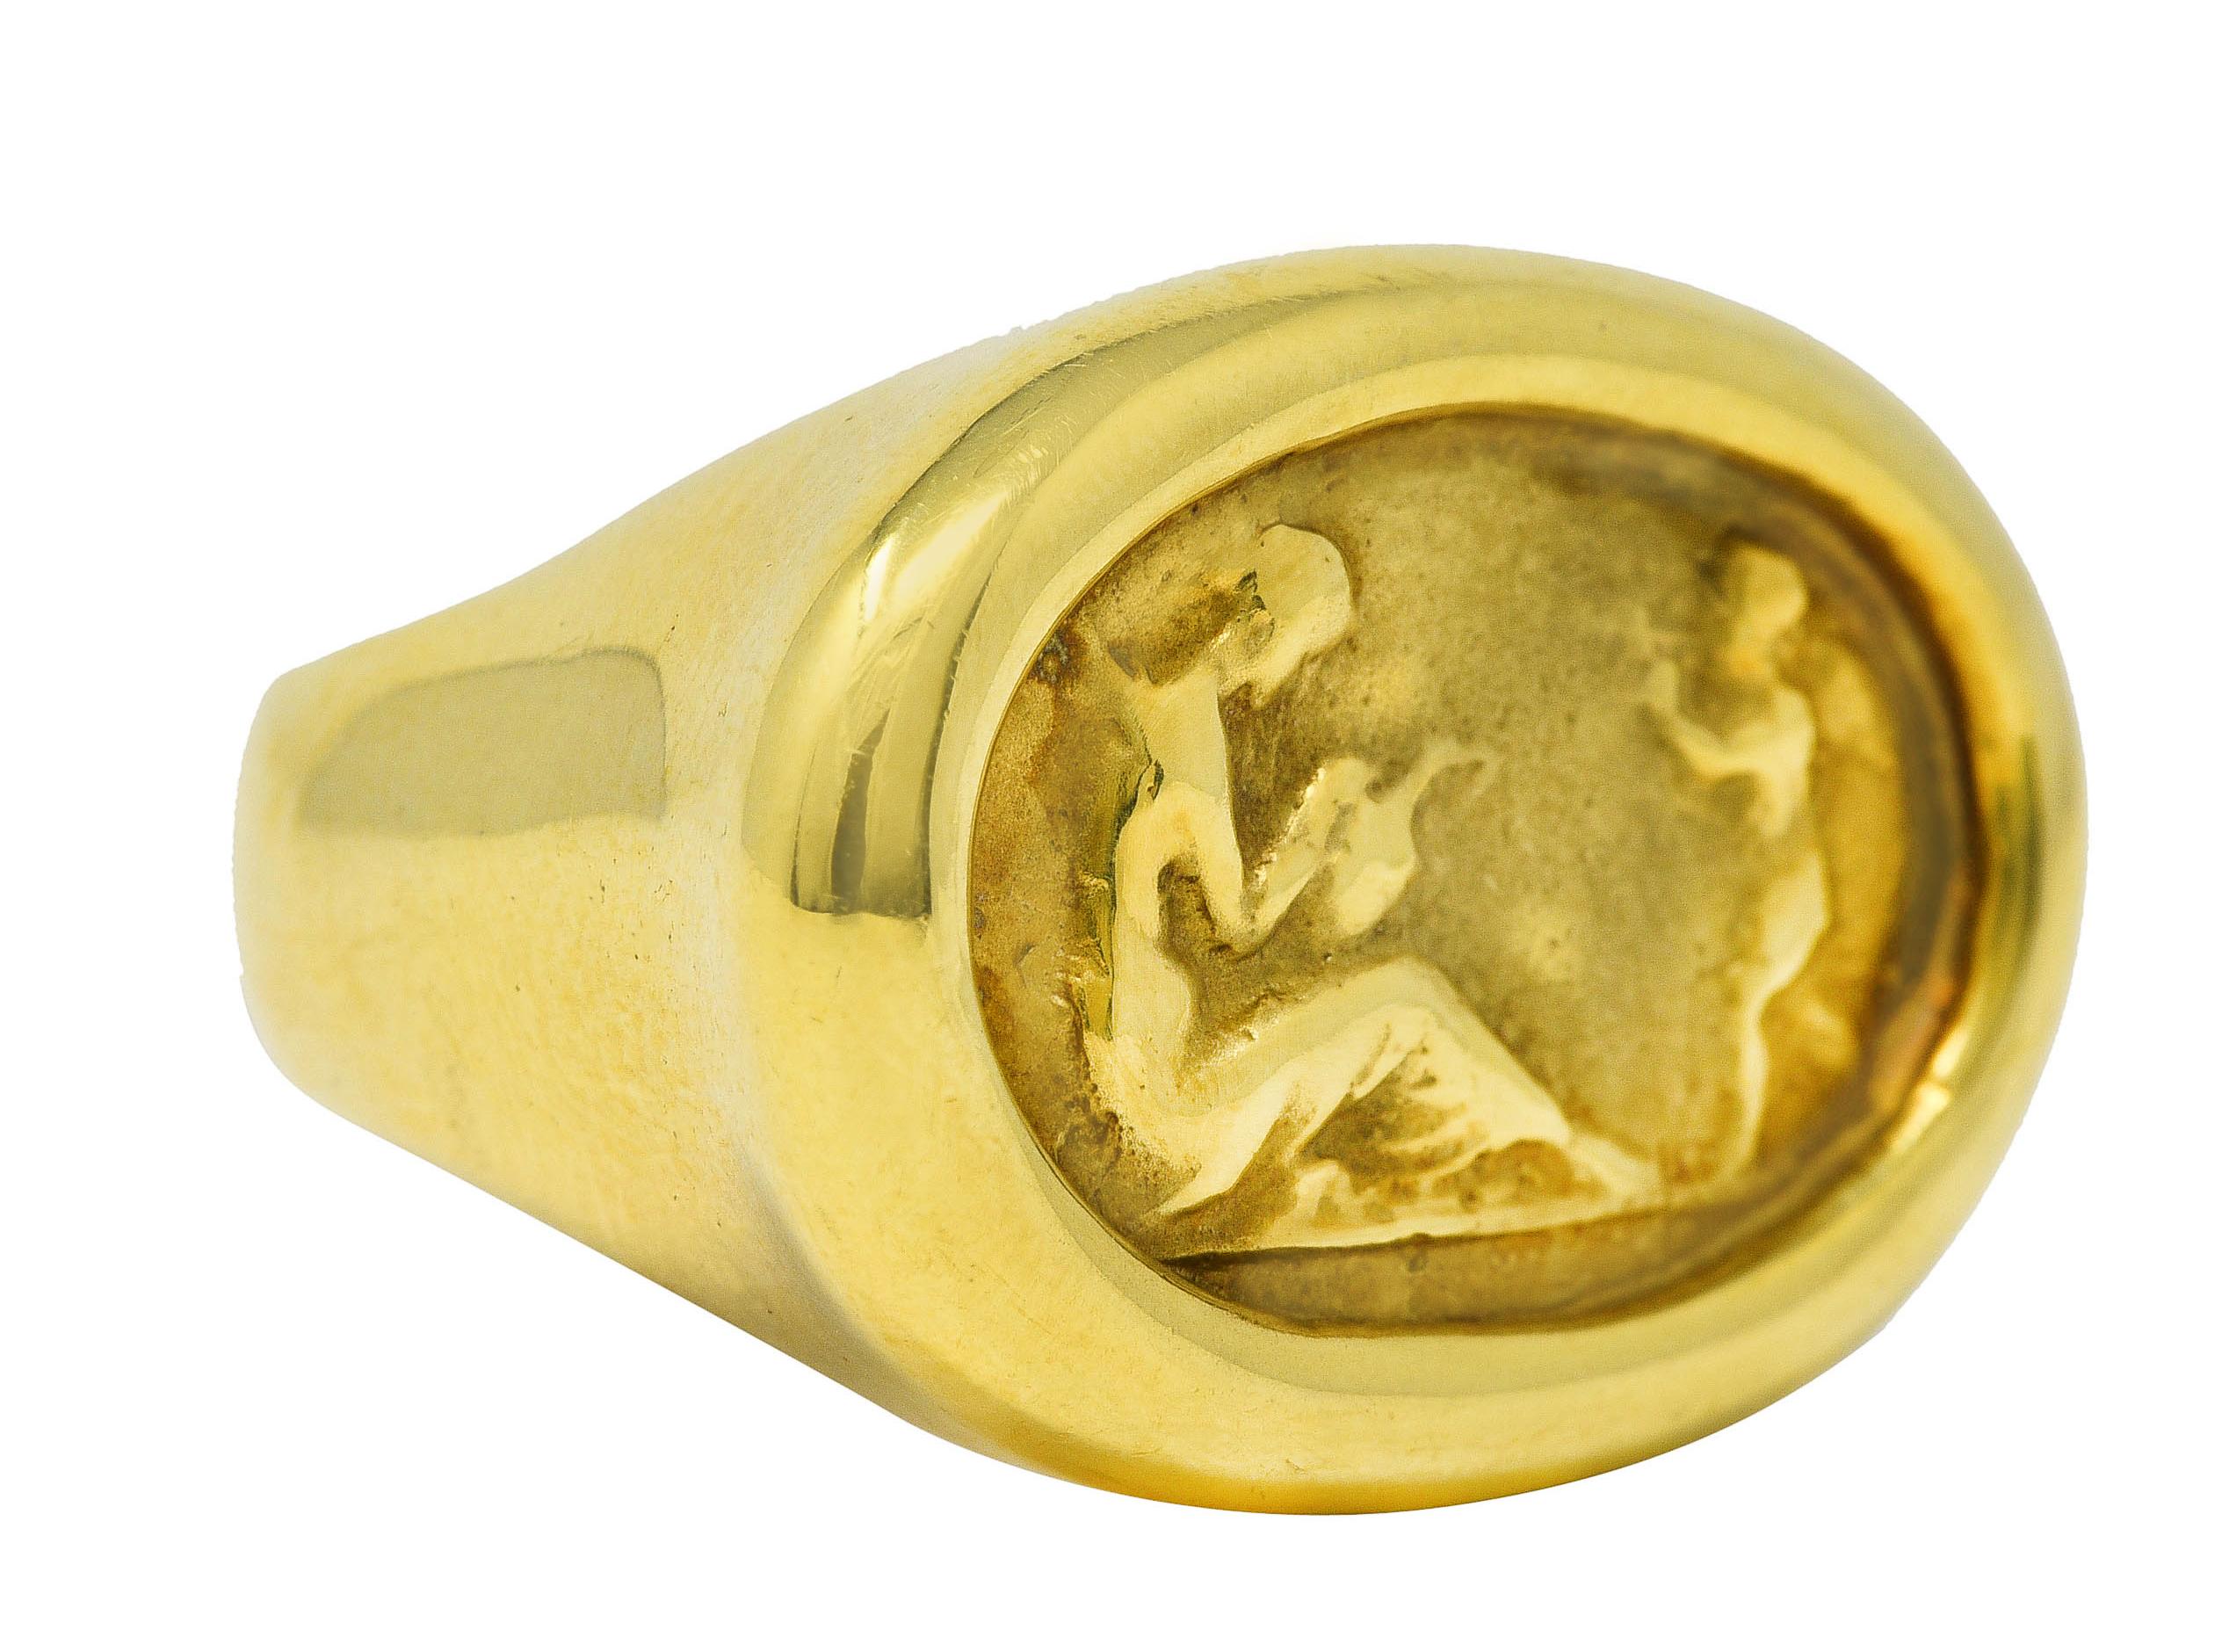 Centering an East to West repoussè of a reclining Venus holding vase with a winged Cupid

With fluted high polished gold surround

Stamped 14k for 14 karat gold

With maker's mark 

Circa: 1980's

Ring size: 6 1/2 and sizable

Measures: North to